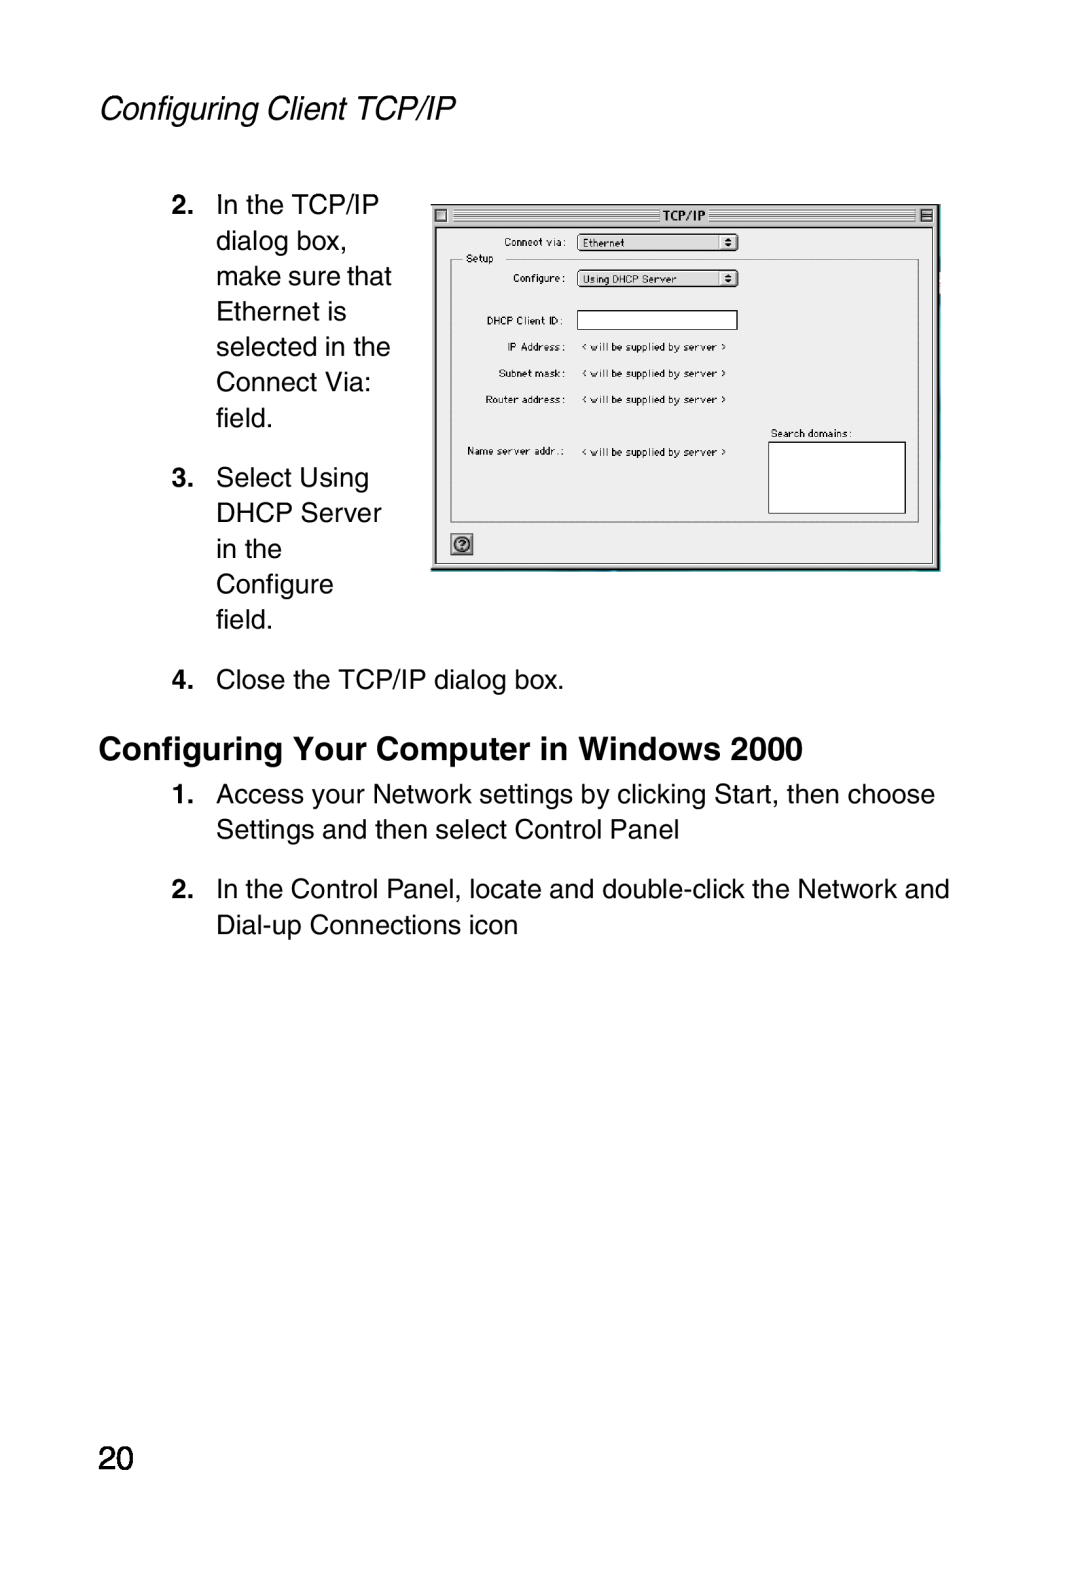 Sharp SMC7004ABR, S M C 7 0 0 4 A B R manual Configuring Your Computer in Windows, Configuring Client TCP/IP 